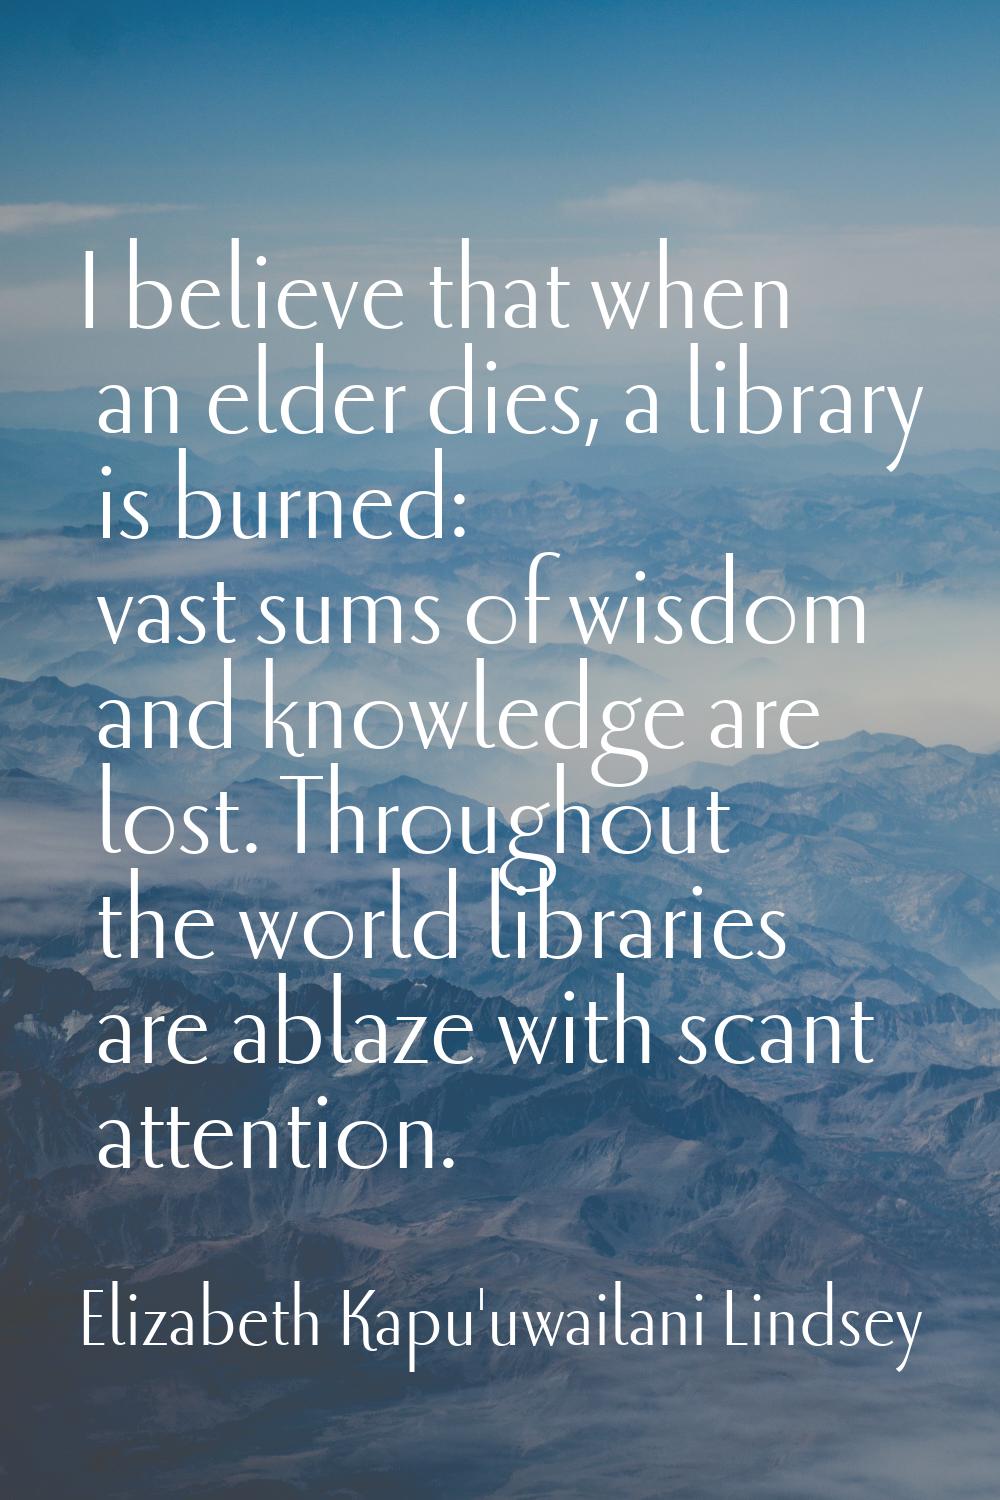 I believe that when an elder dies, a library is burned: vast sums of wisdom and knowledge are lost.